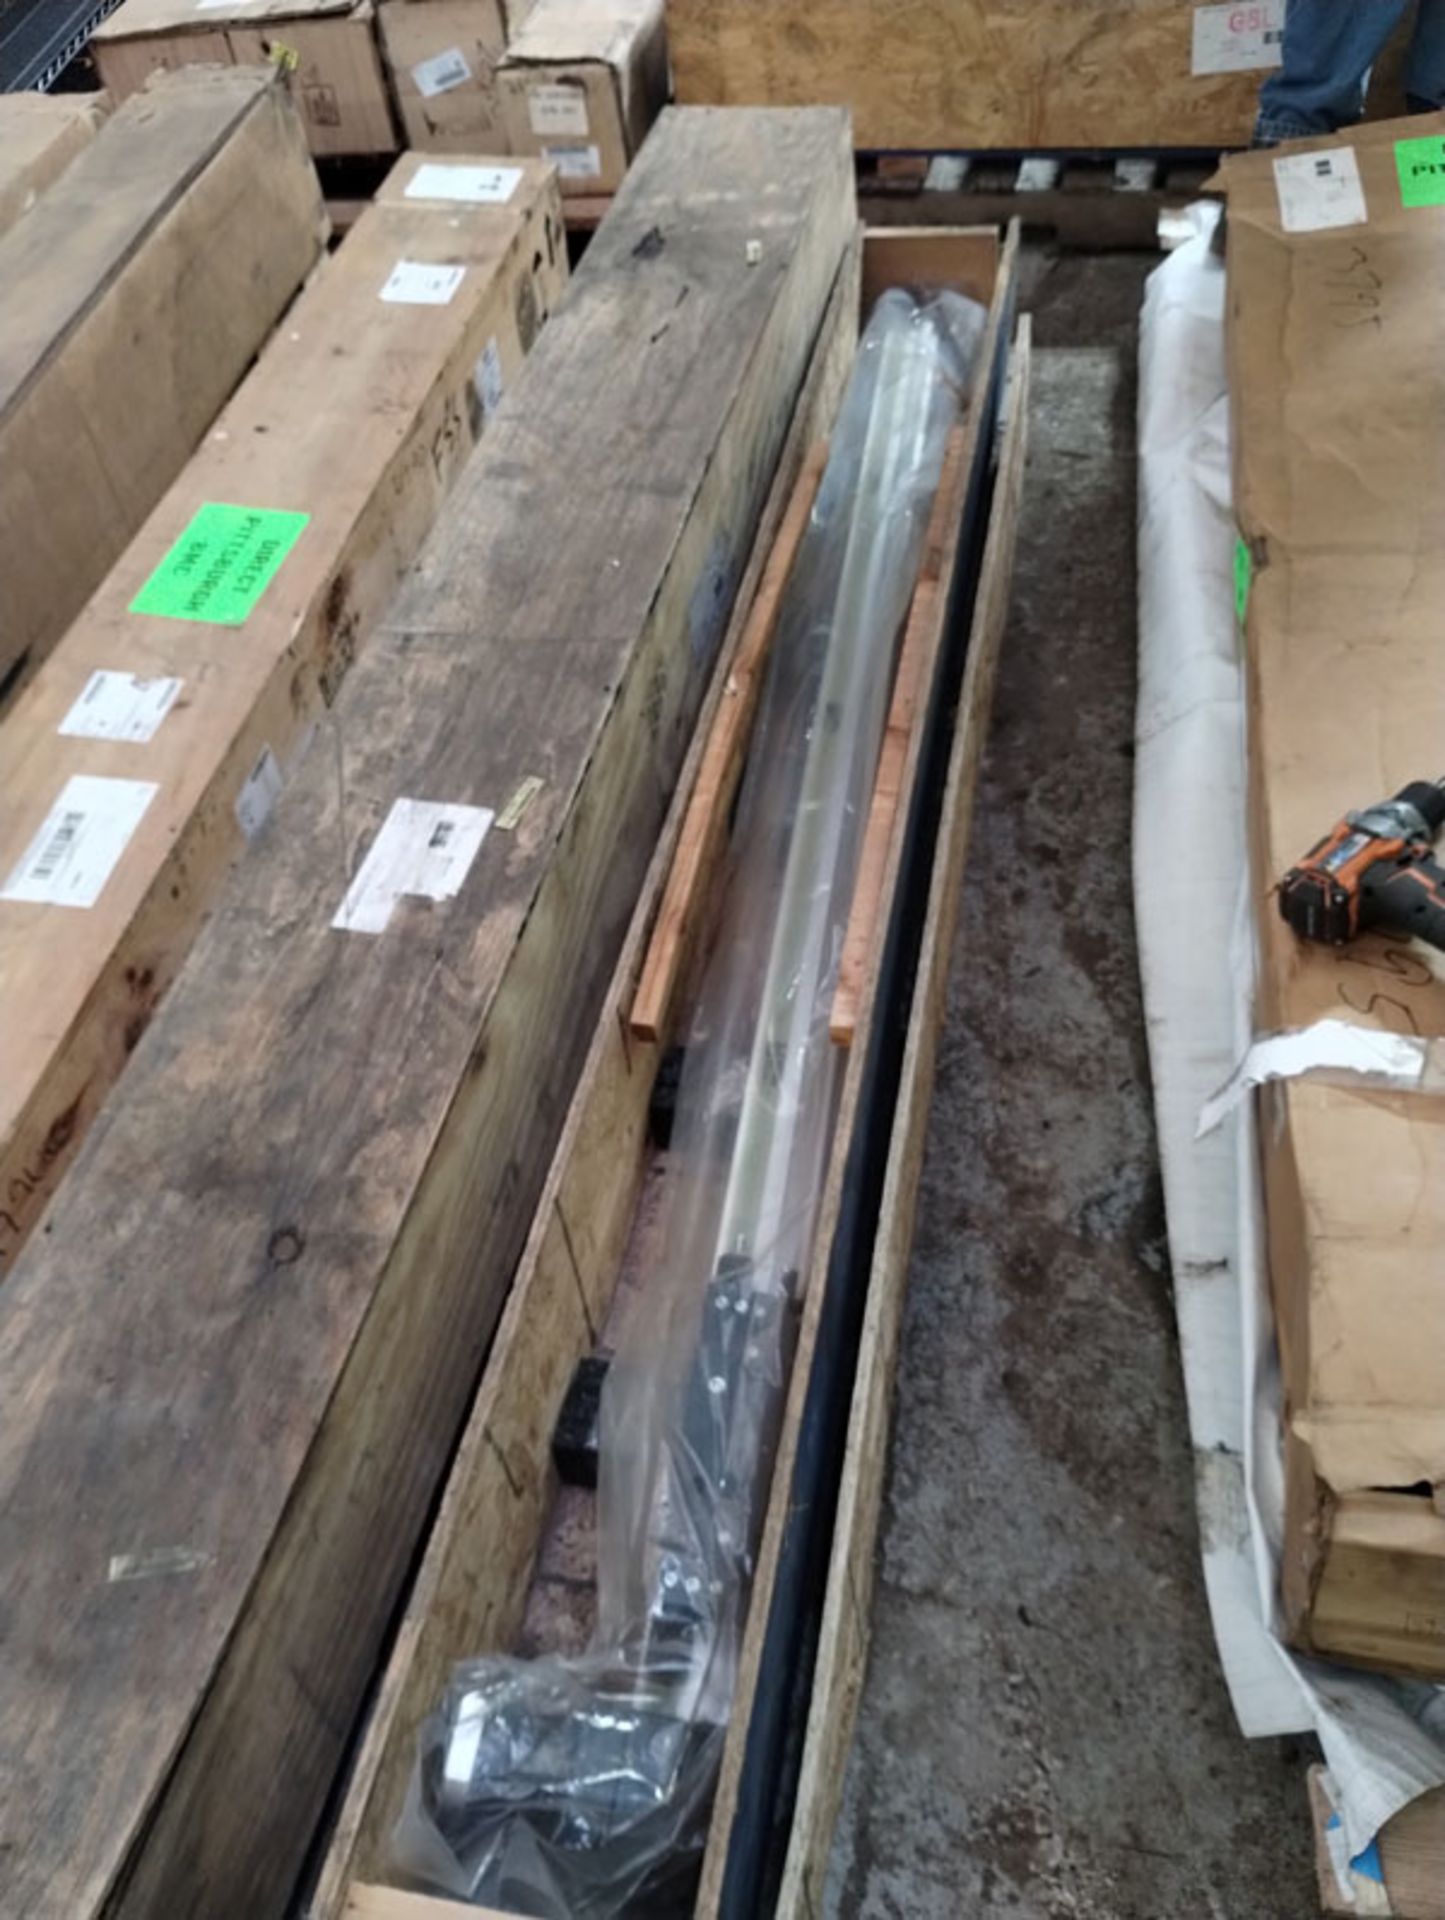 87" LINEAR ACTUATOR PART# 8676C01 -- Lot located at second location: 6800 Union ave. , Cleveland OH